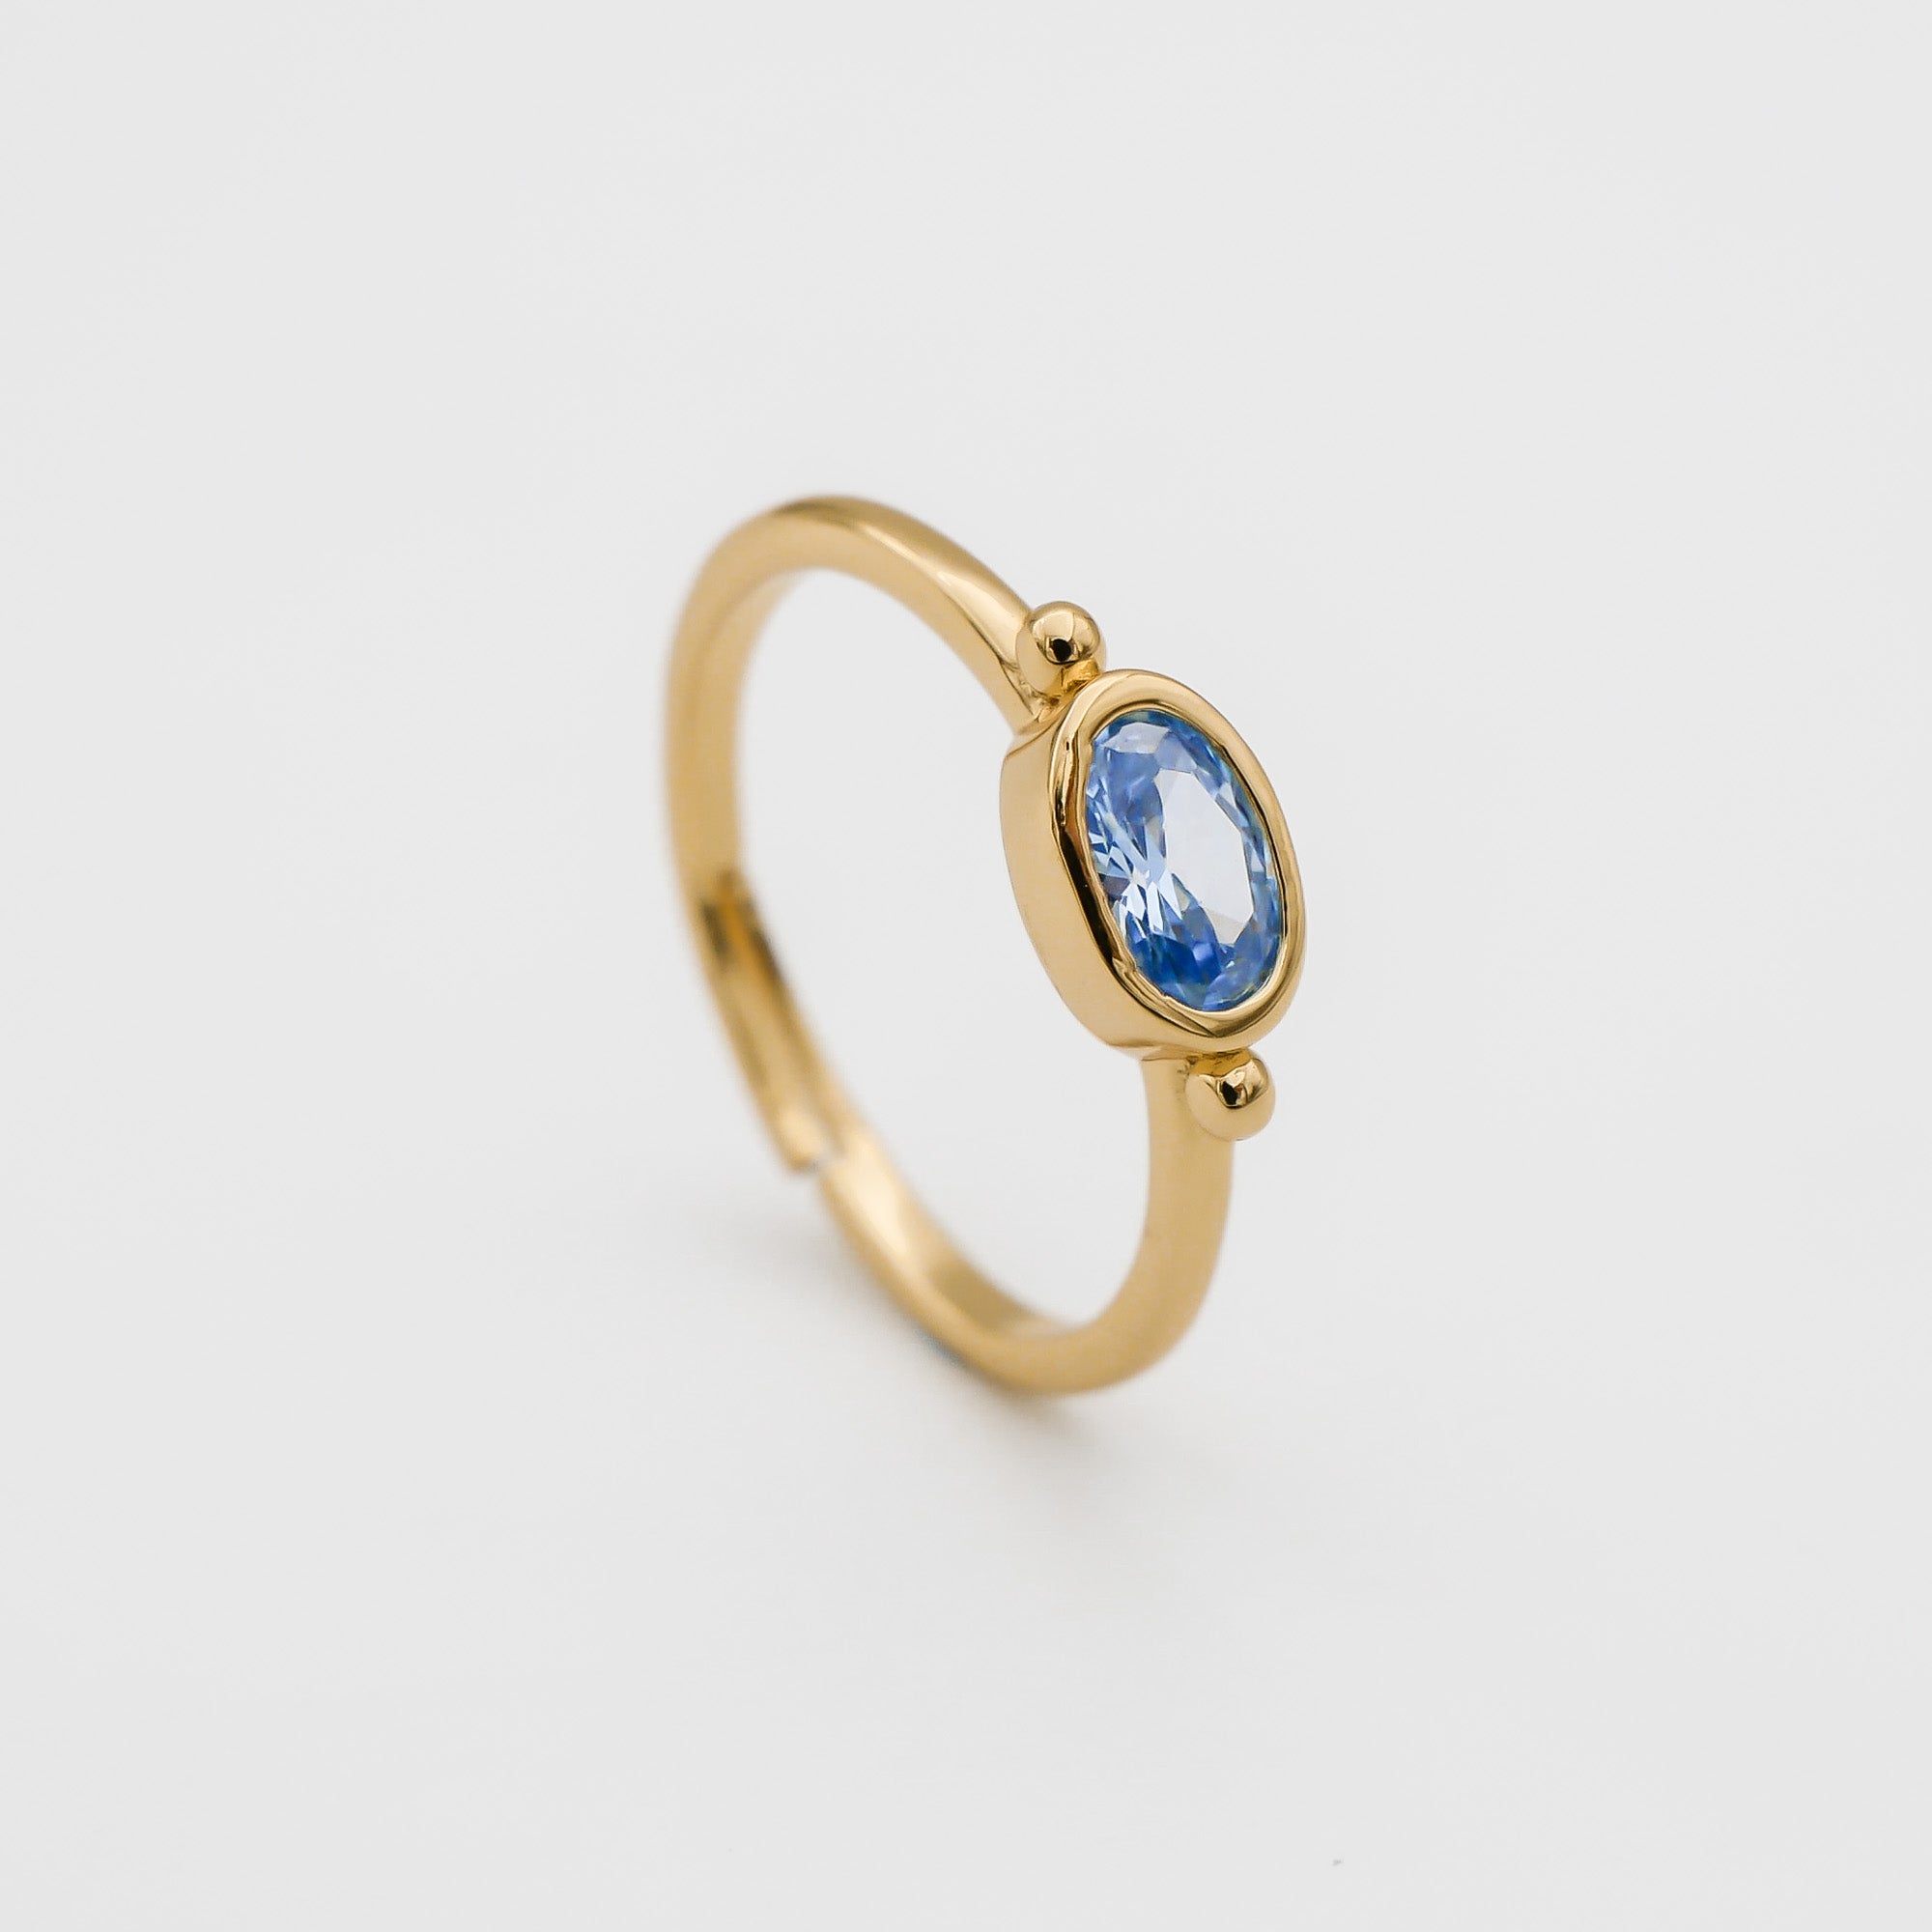 Birthstone ring gold for March with Aquamarine